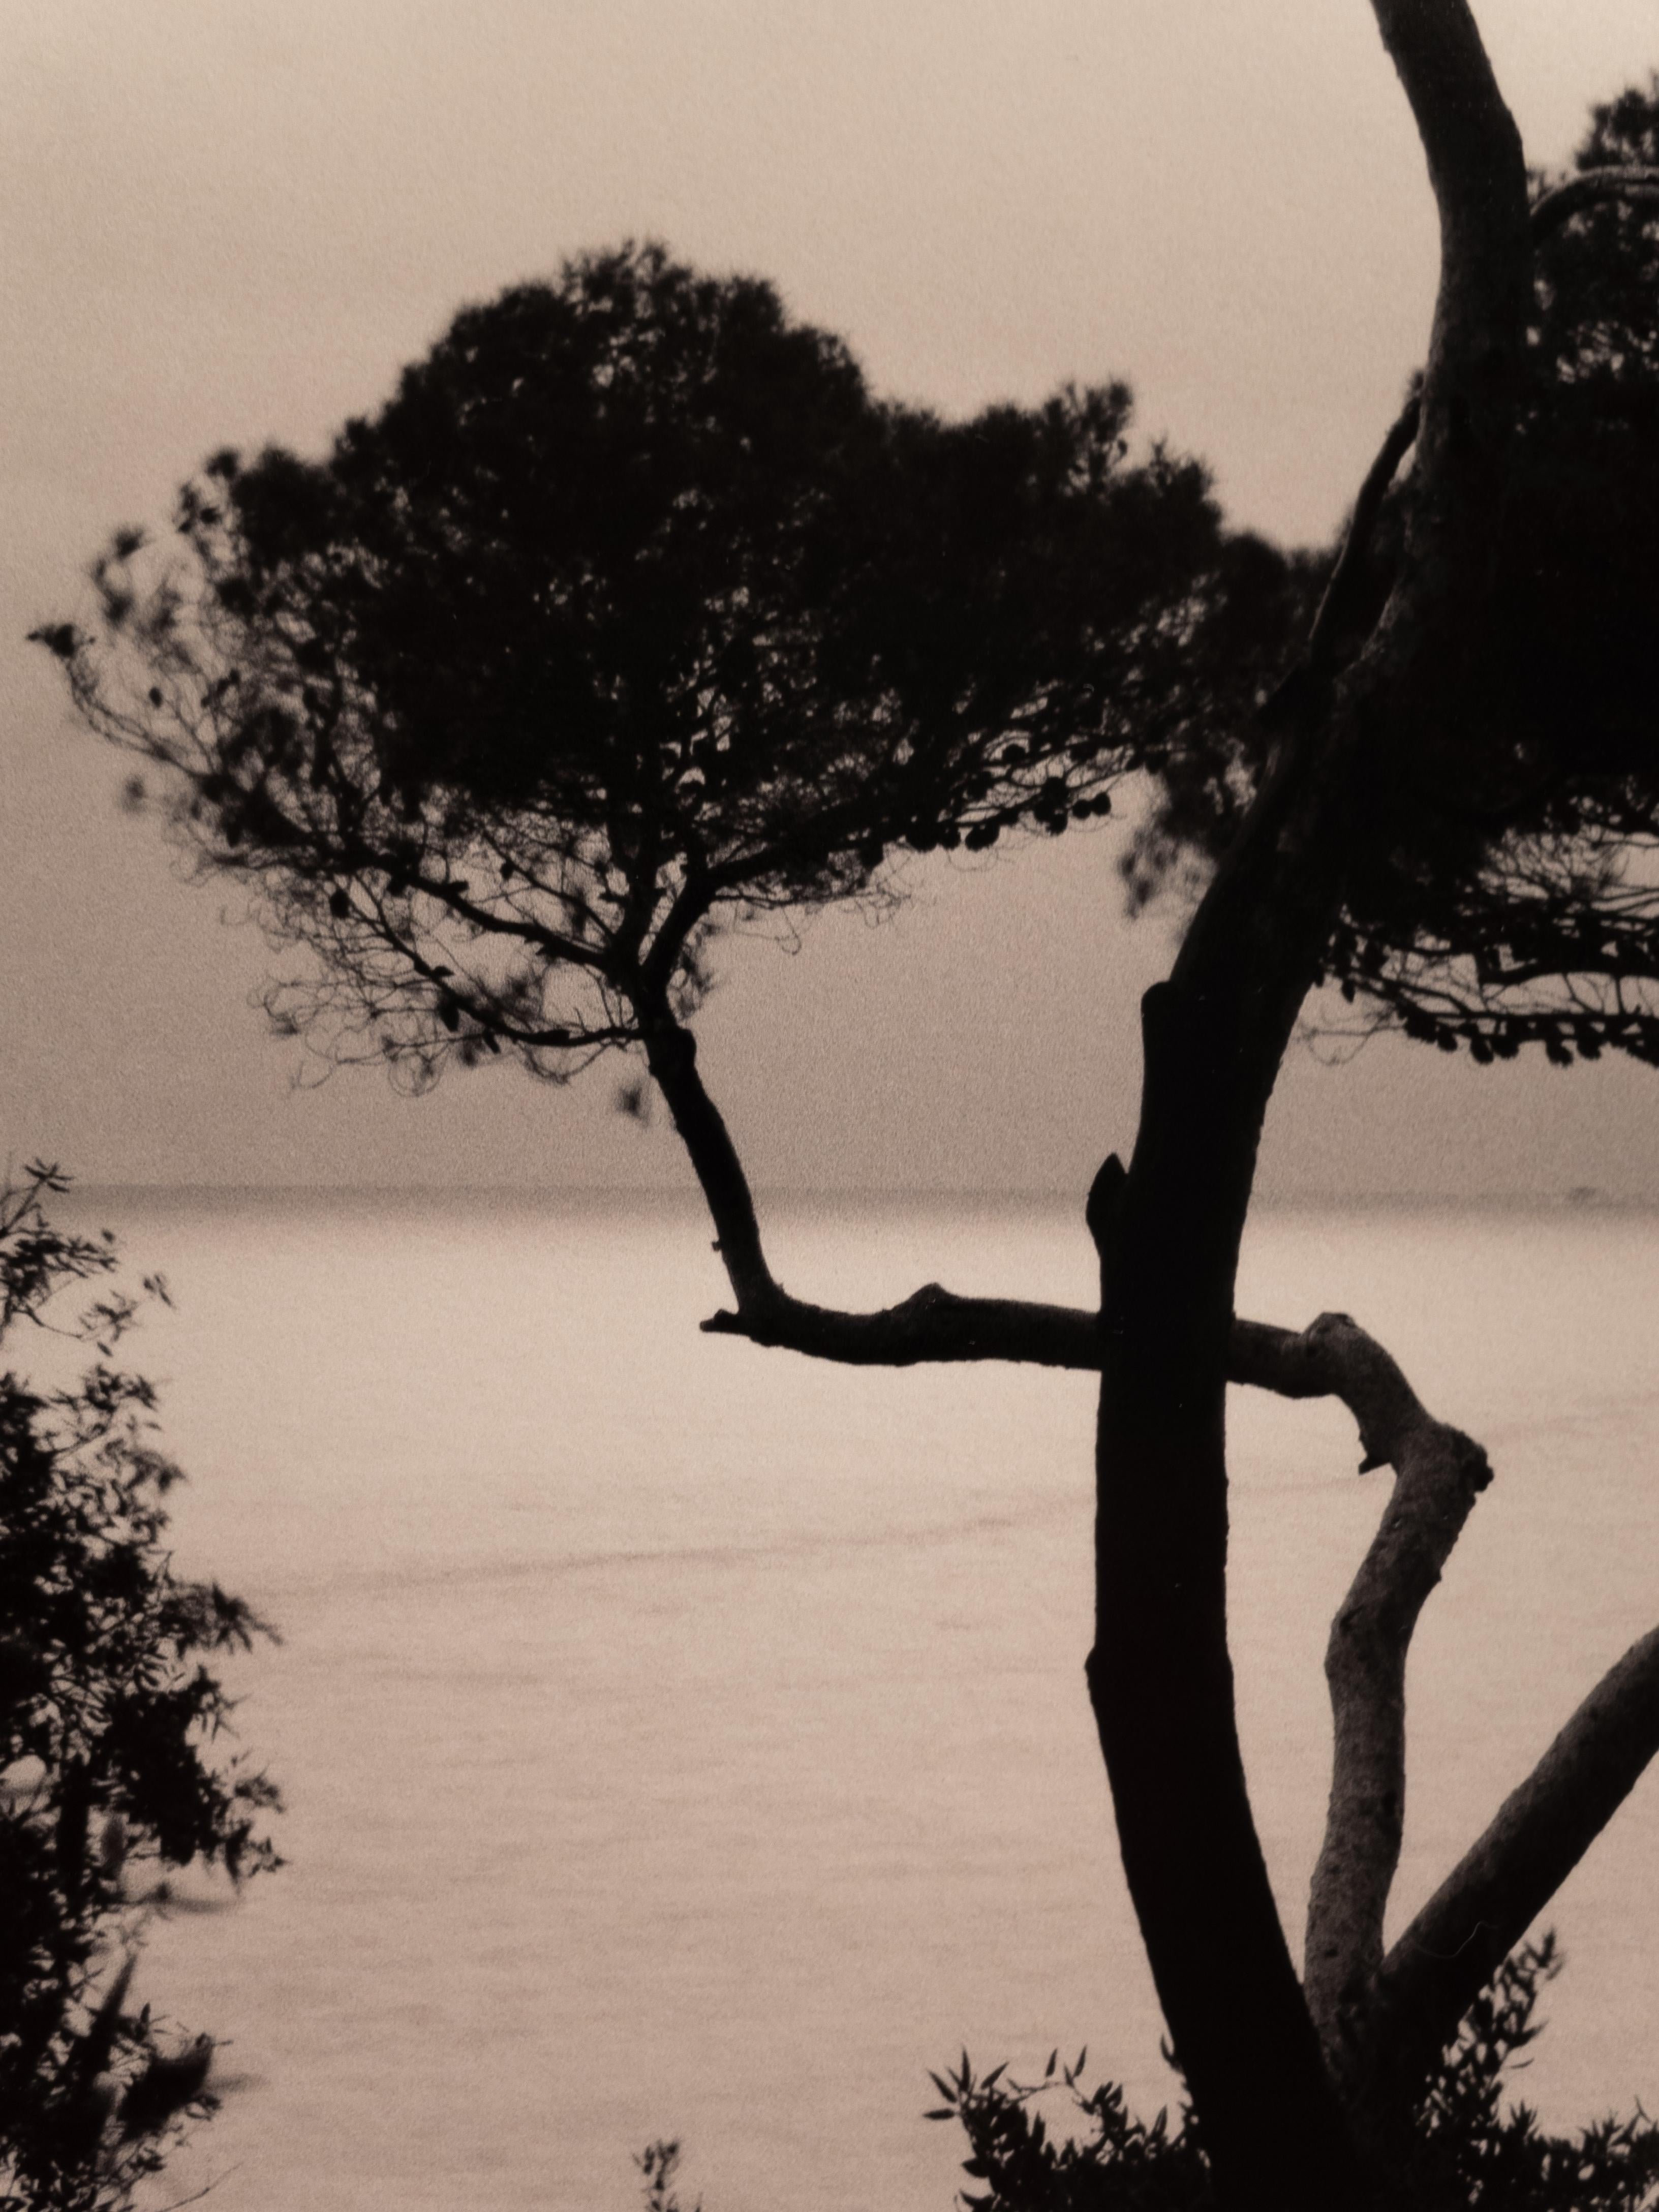 Currents - analogue landscape photography of Italian riviera - Photograph by Ugne Pouwell